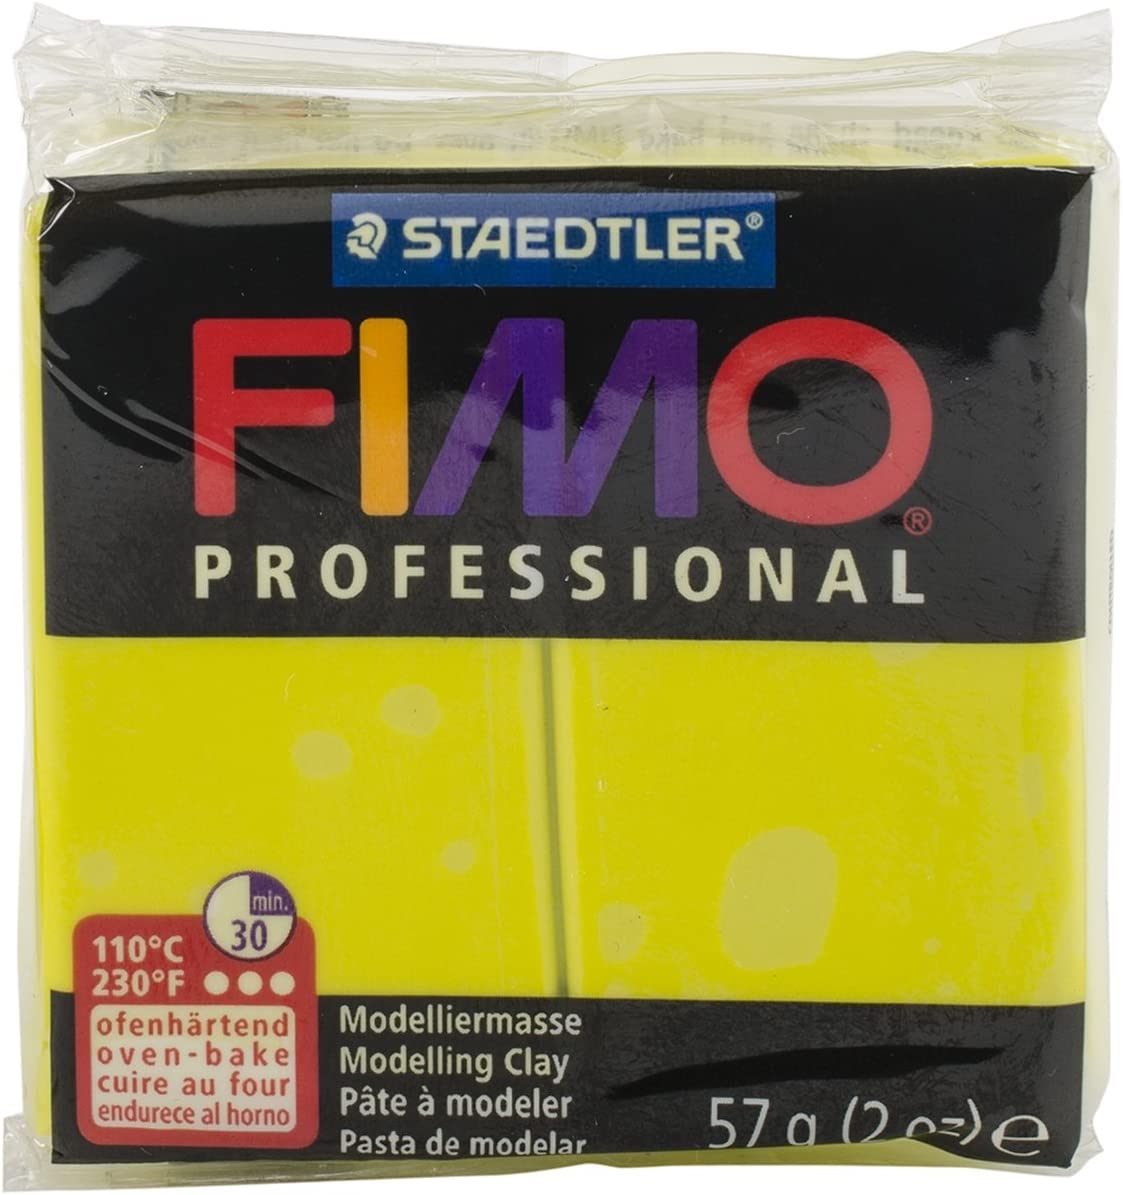 STAEDTLER Fimo Professional Soft Polymer Clay, 2 oz, Lemon Yellow Import To Shop ×Product customization General Description